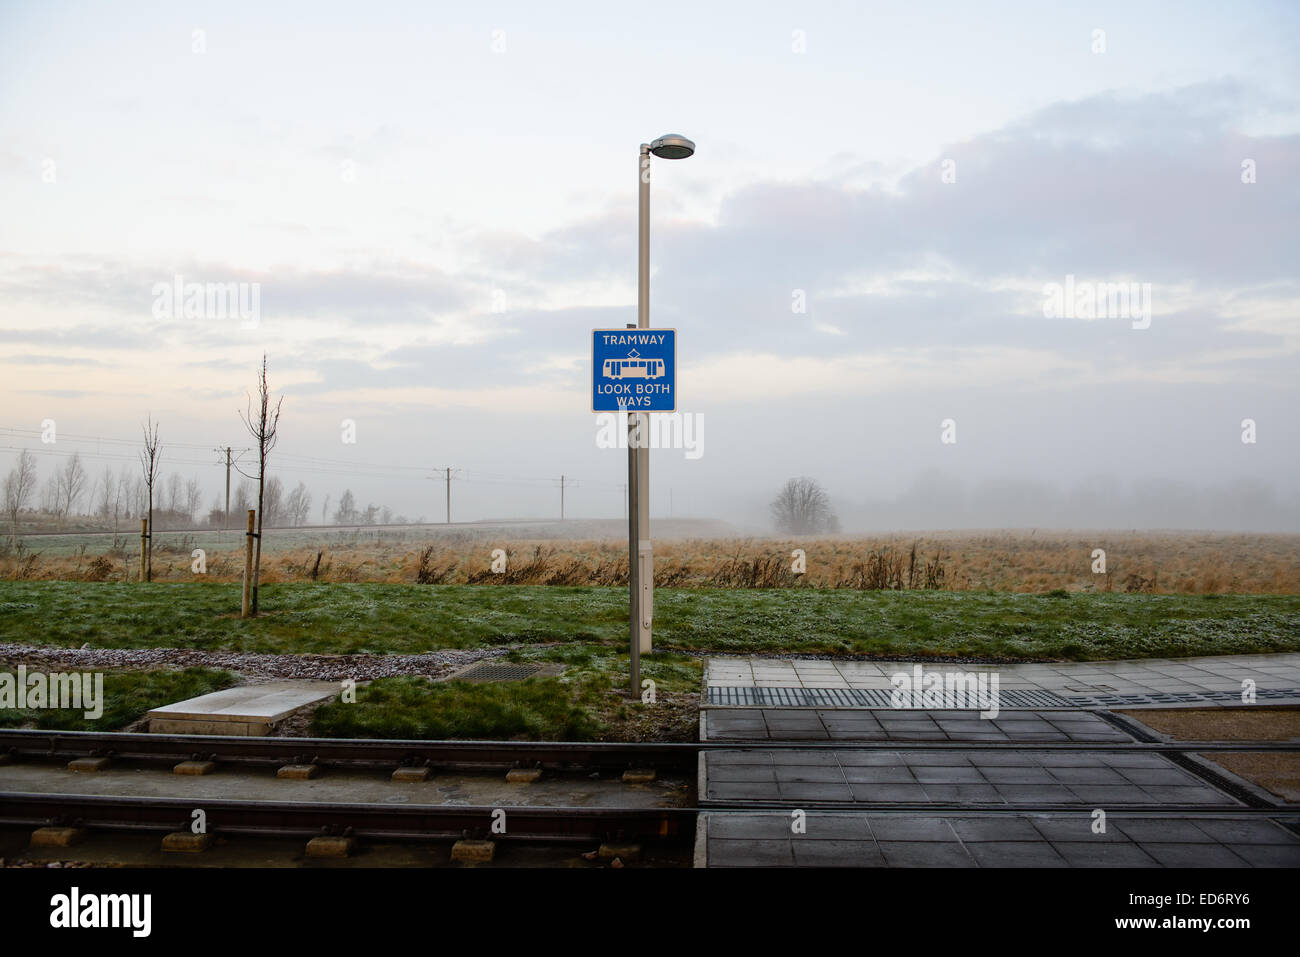 A sign at Ingliston Park & Ride and Edinburgh Tram station reads; Tramway, Look both ways. Stock Photo